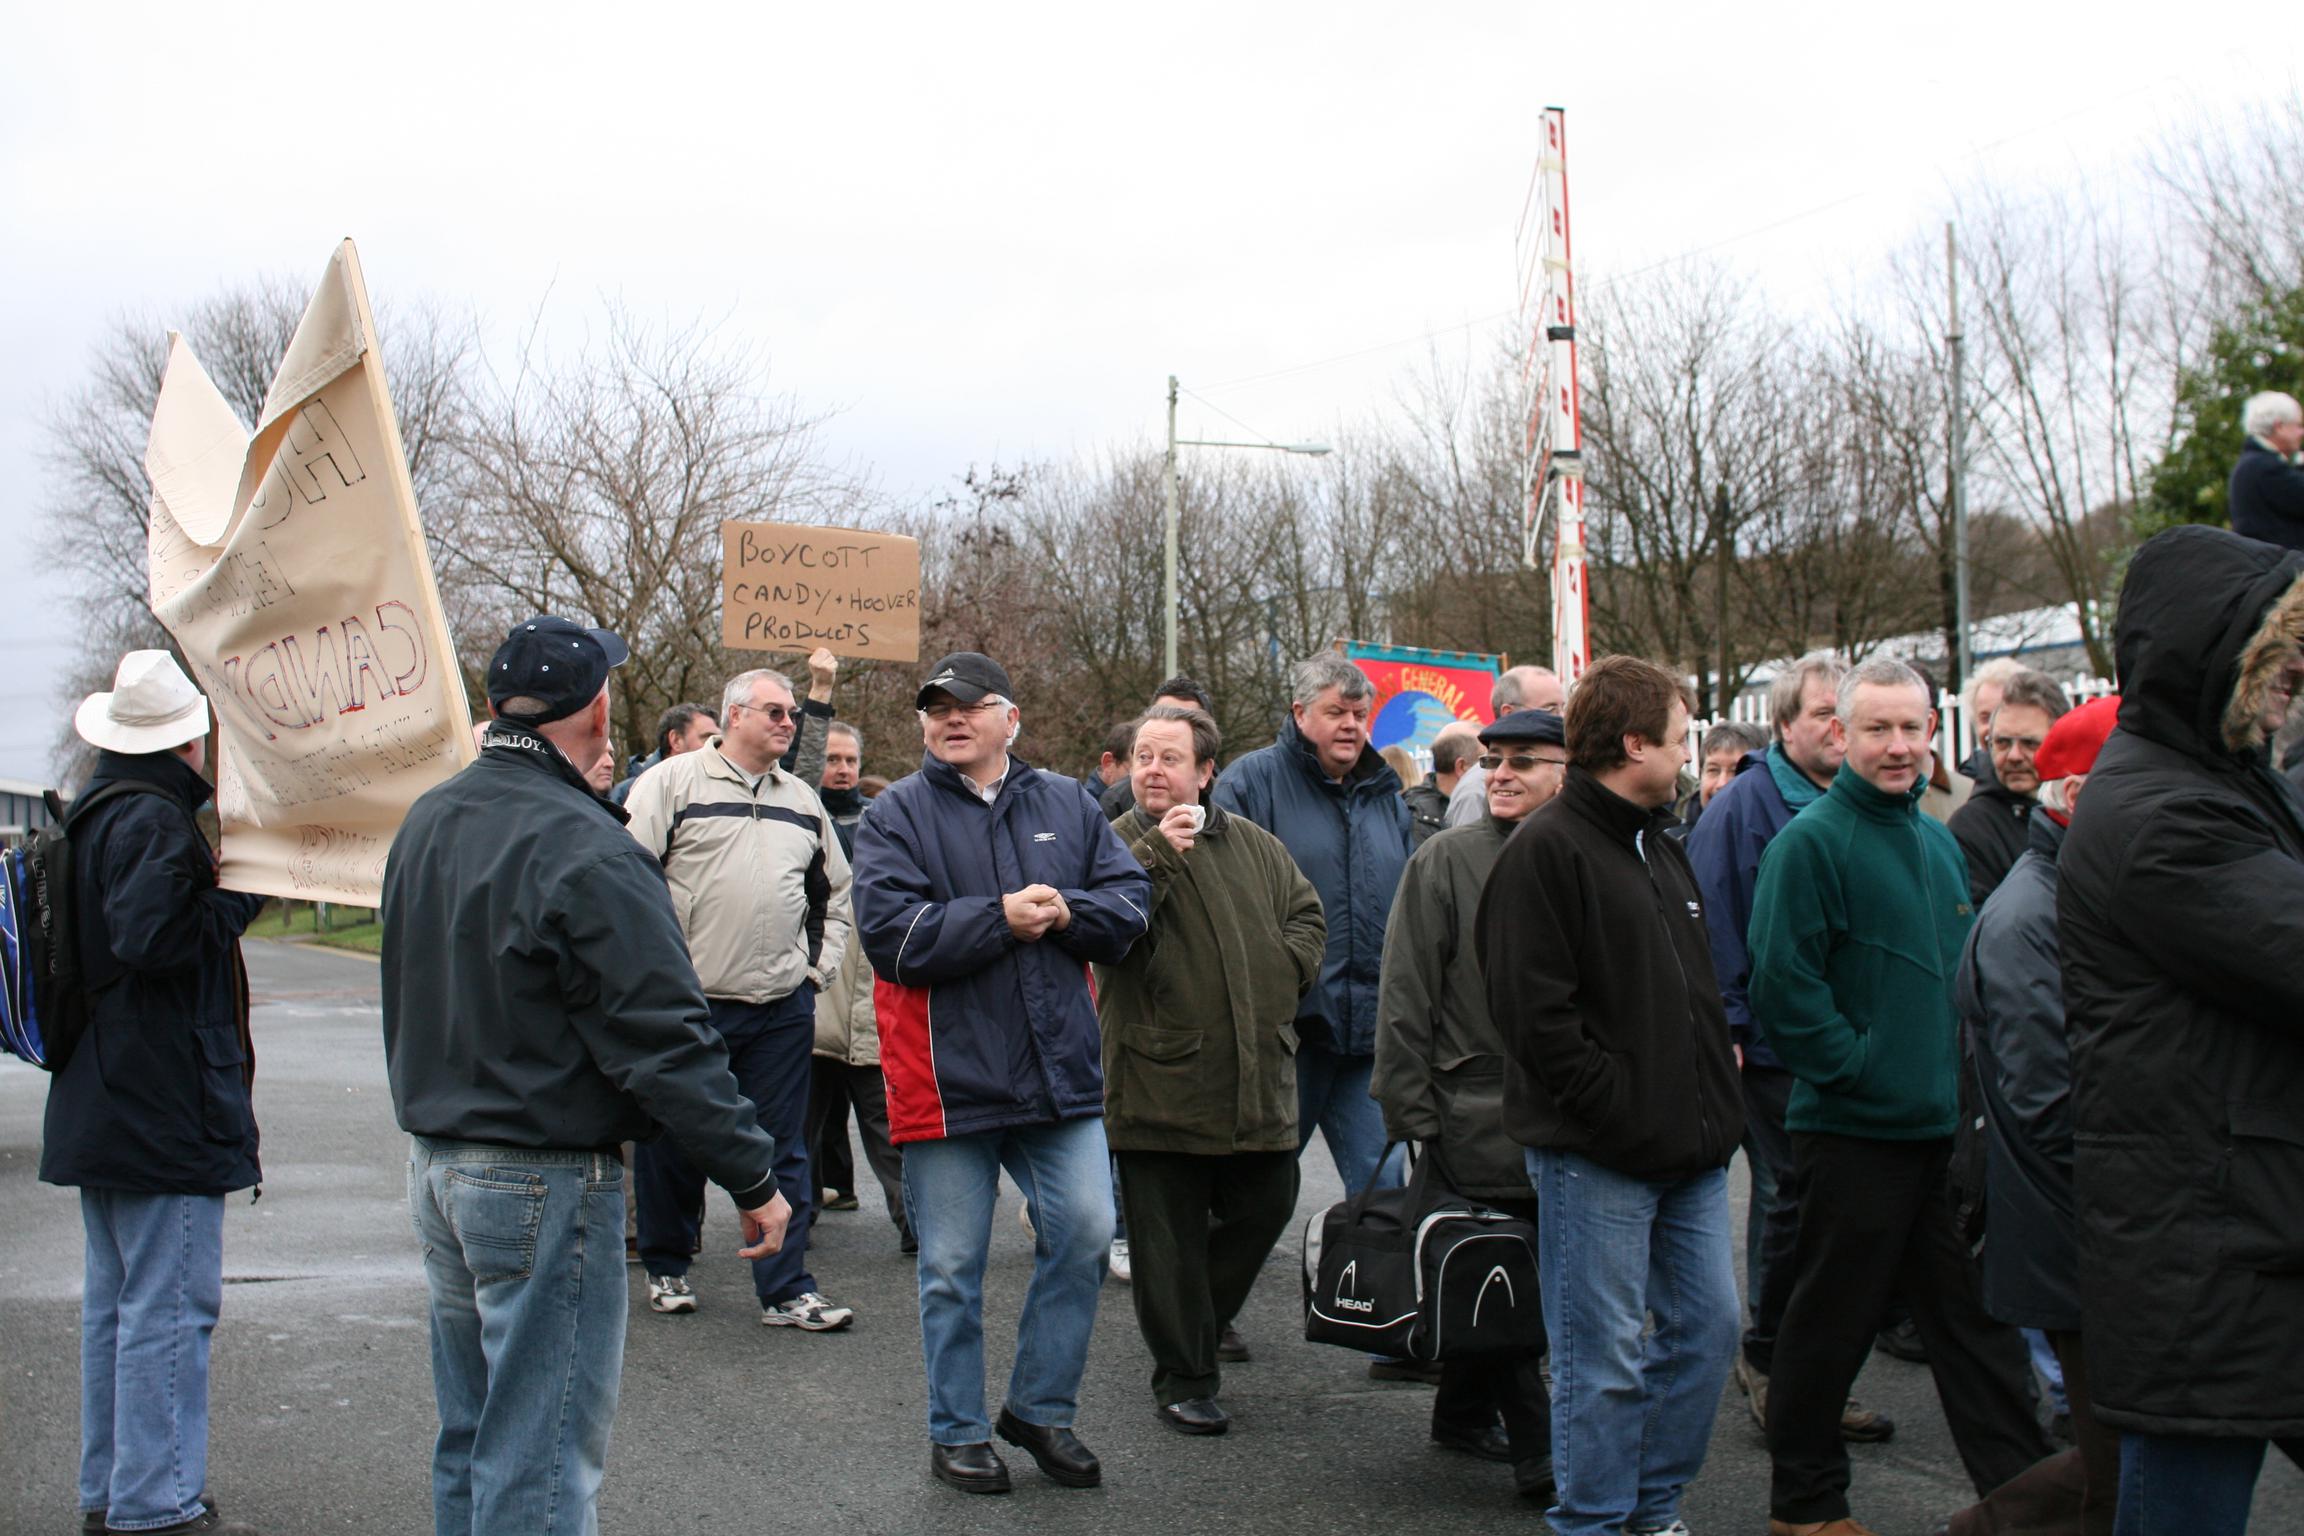 Hoover factory march, Merthyr Tydfil, photograph